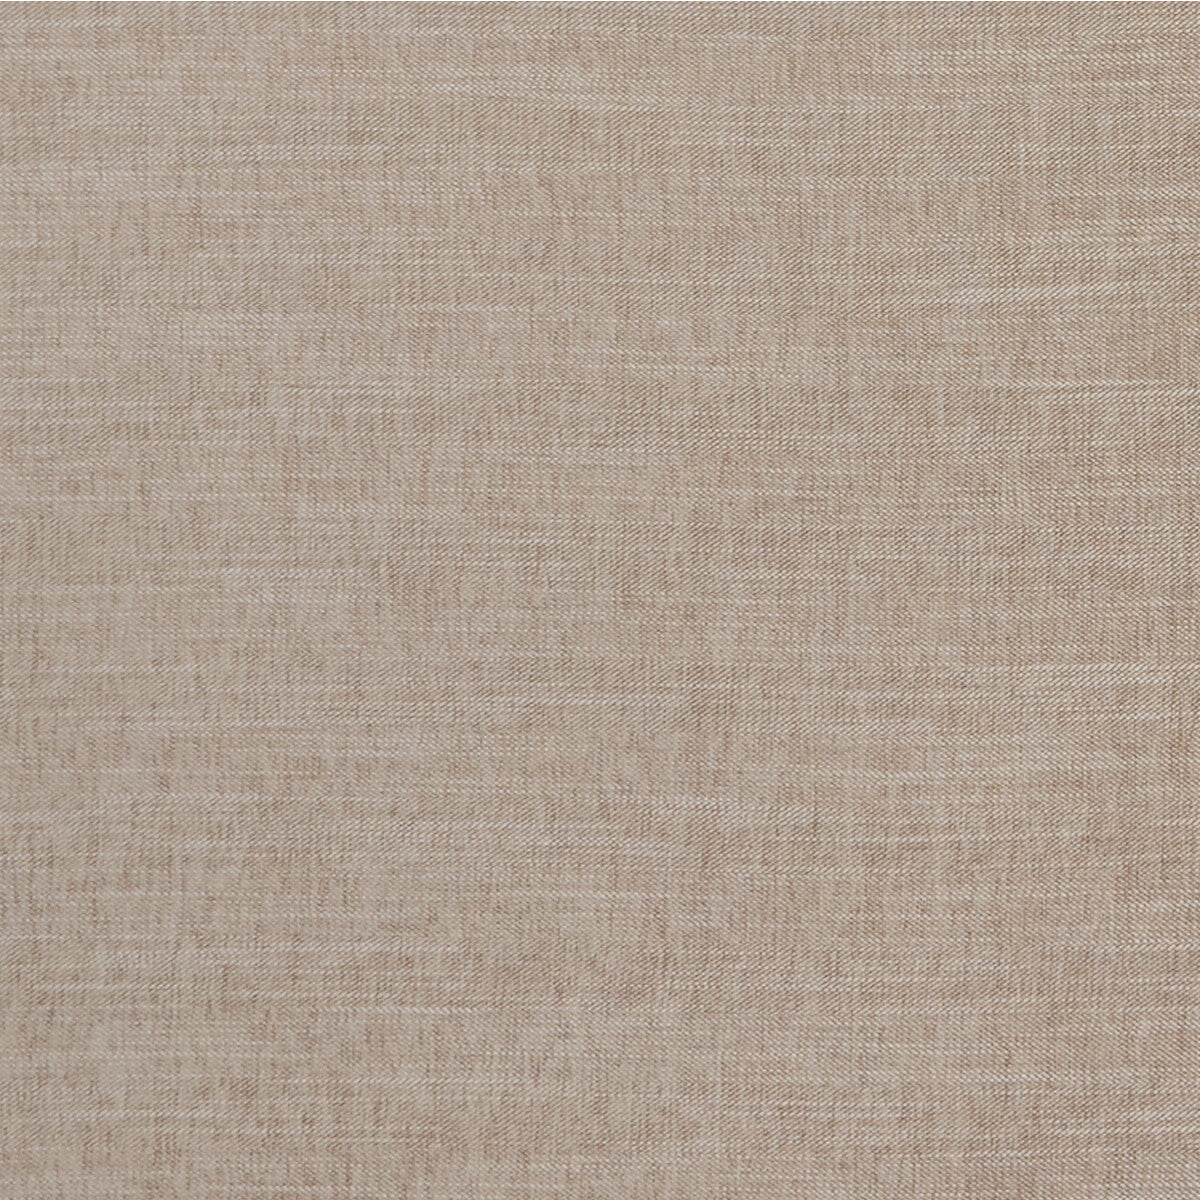 Moray fabric in latte color - pattern F1099/16.CAC.0 - by Clarke And Clarke in the Clarke &amp; Clarke Albany &amp; Moray collection